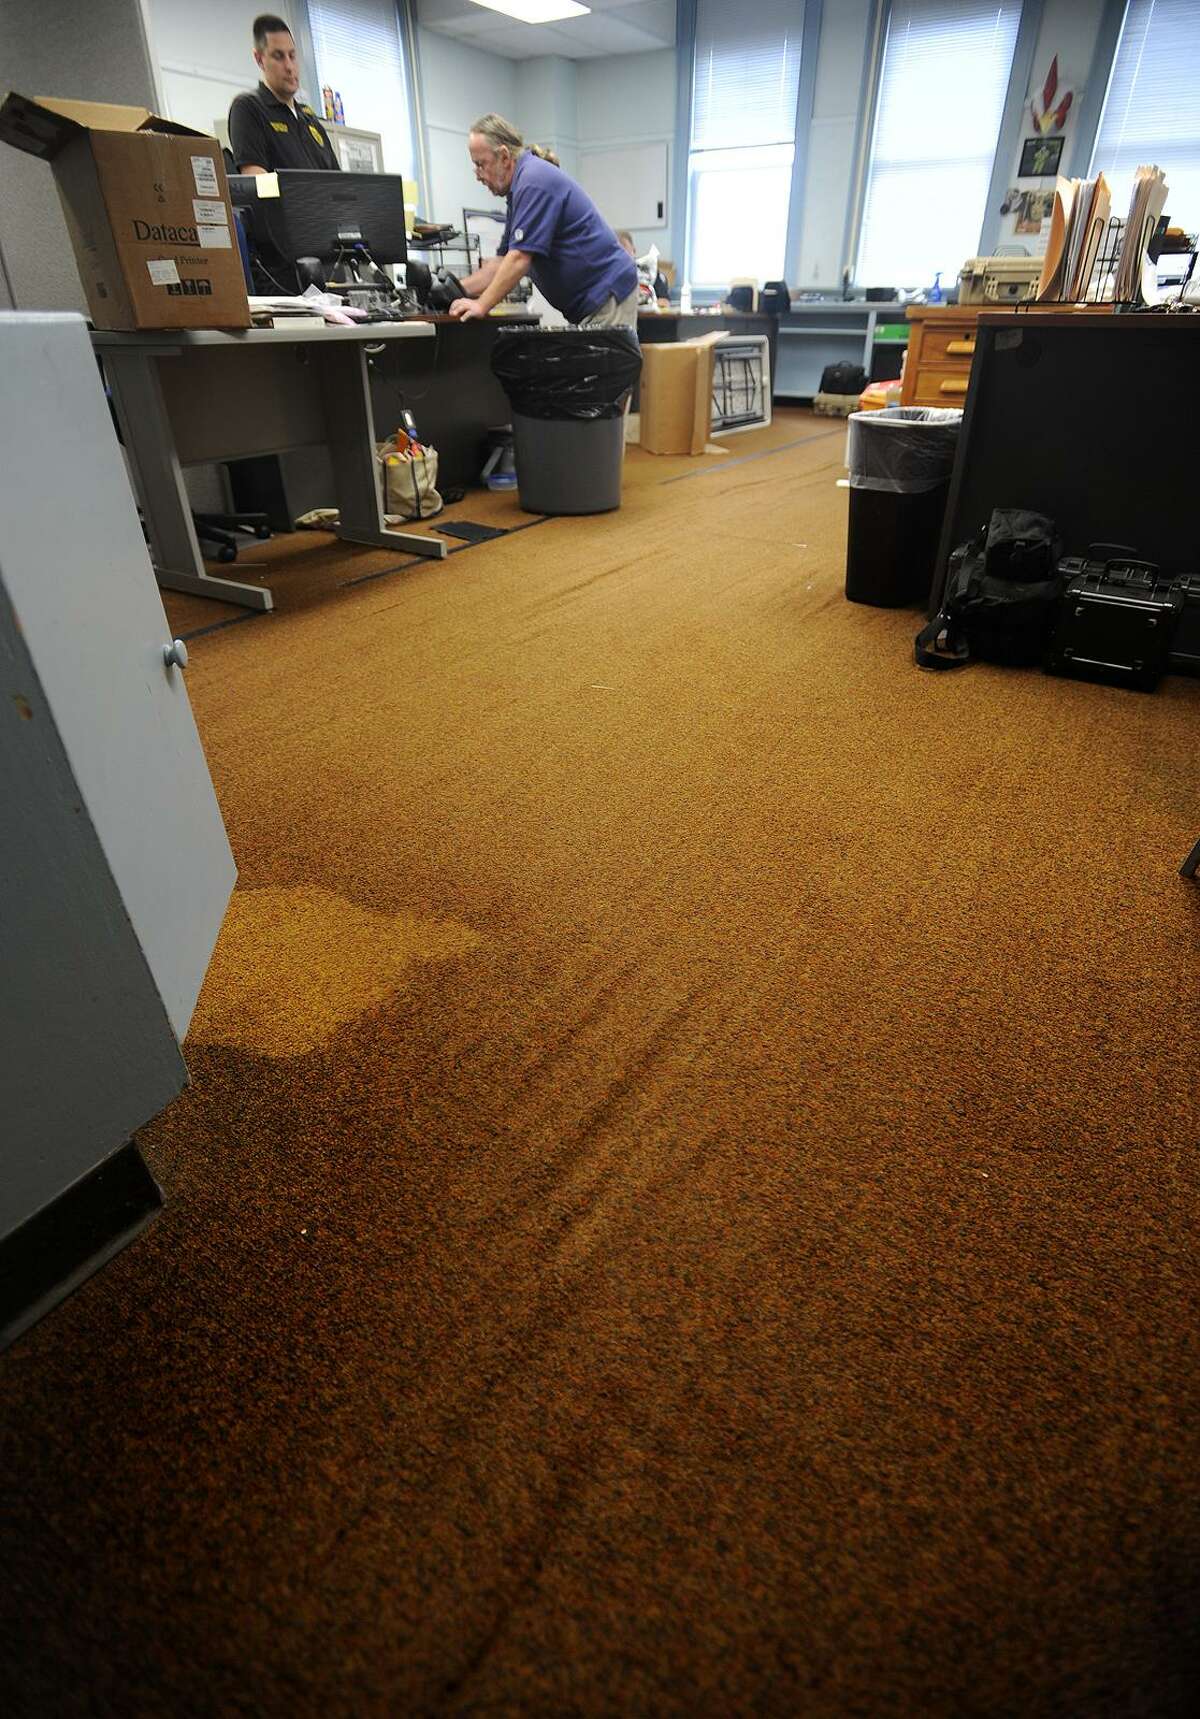 Old rug creates a tripping hazard in the detectives' room at the police station in Ansonia, Conn. on Thursday, October 13, 2016. Ansonia voters are being asked to approve $12 million in bonding for the construction of a new police station.